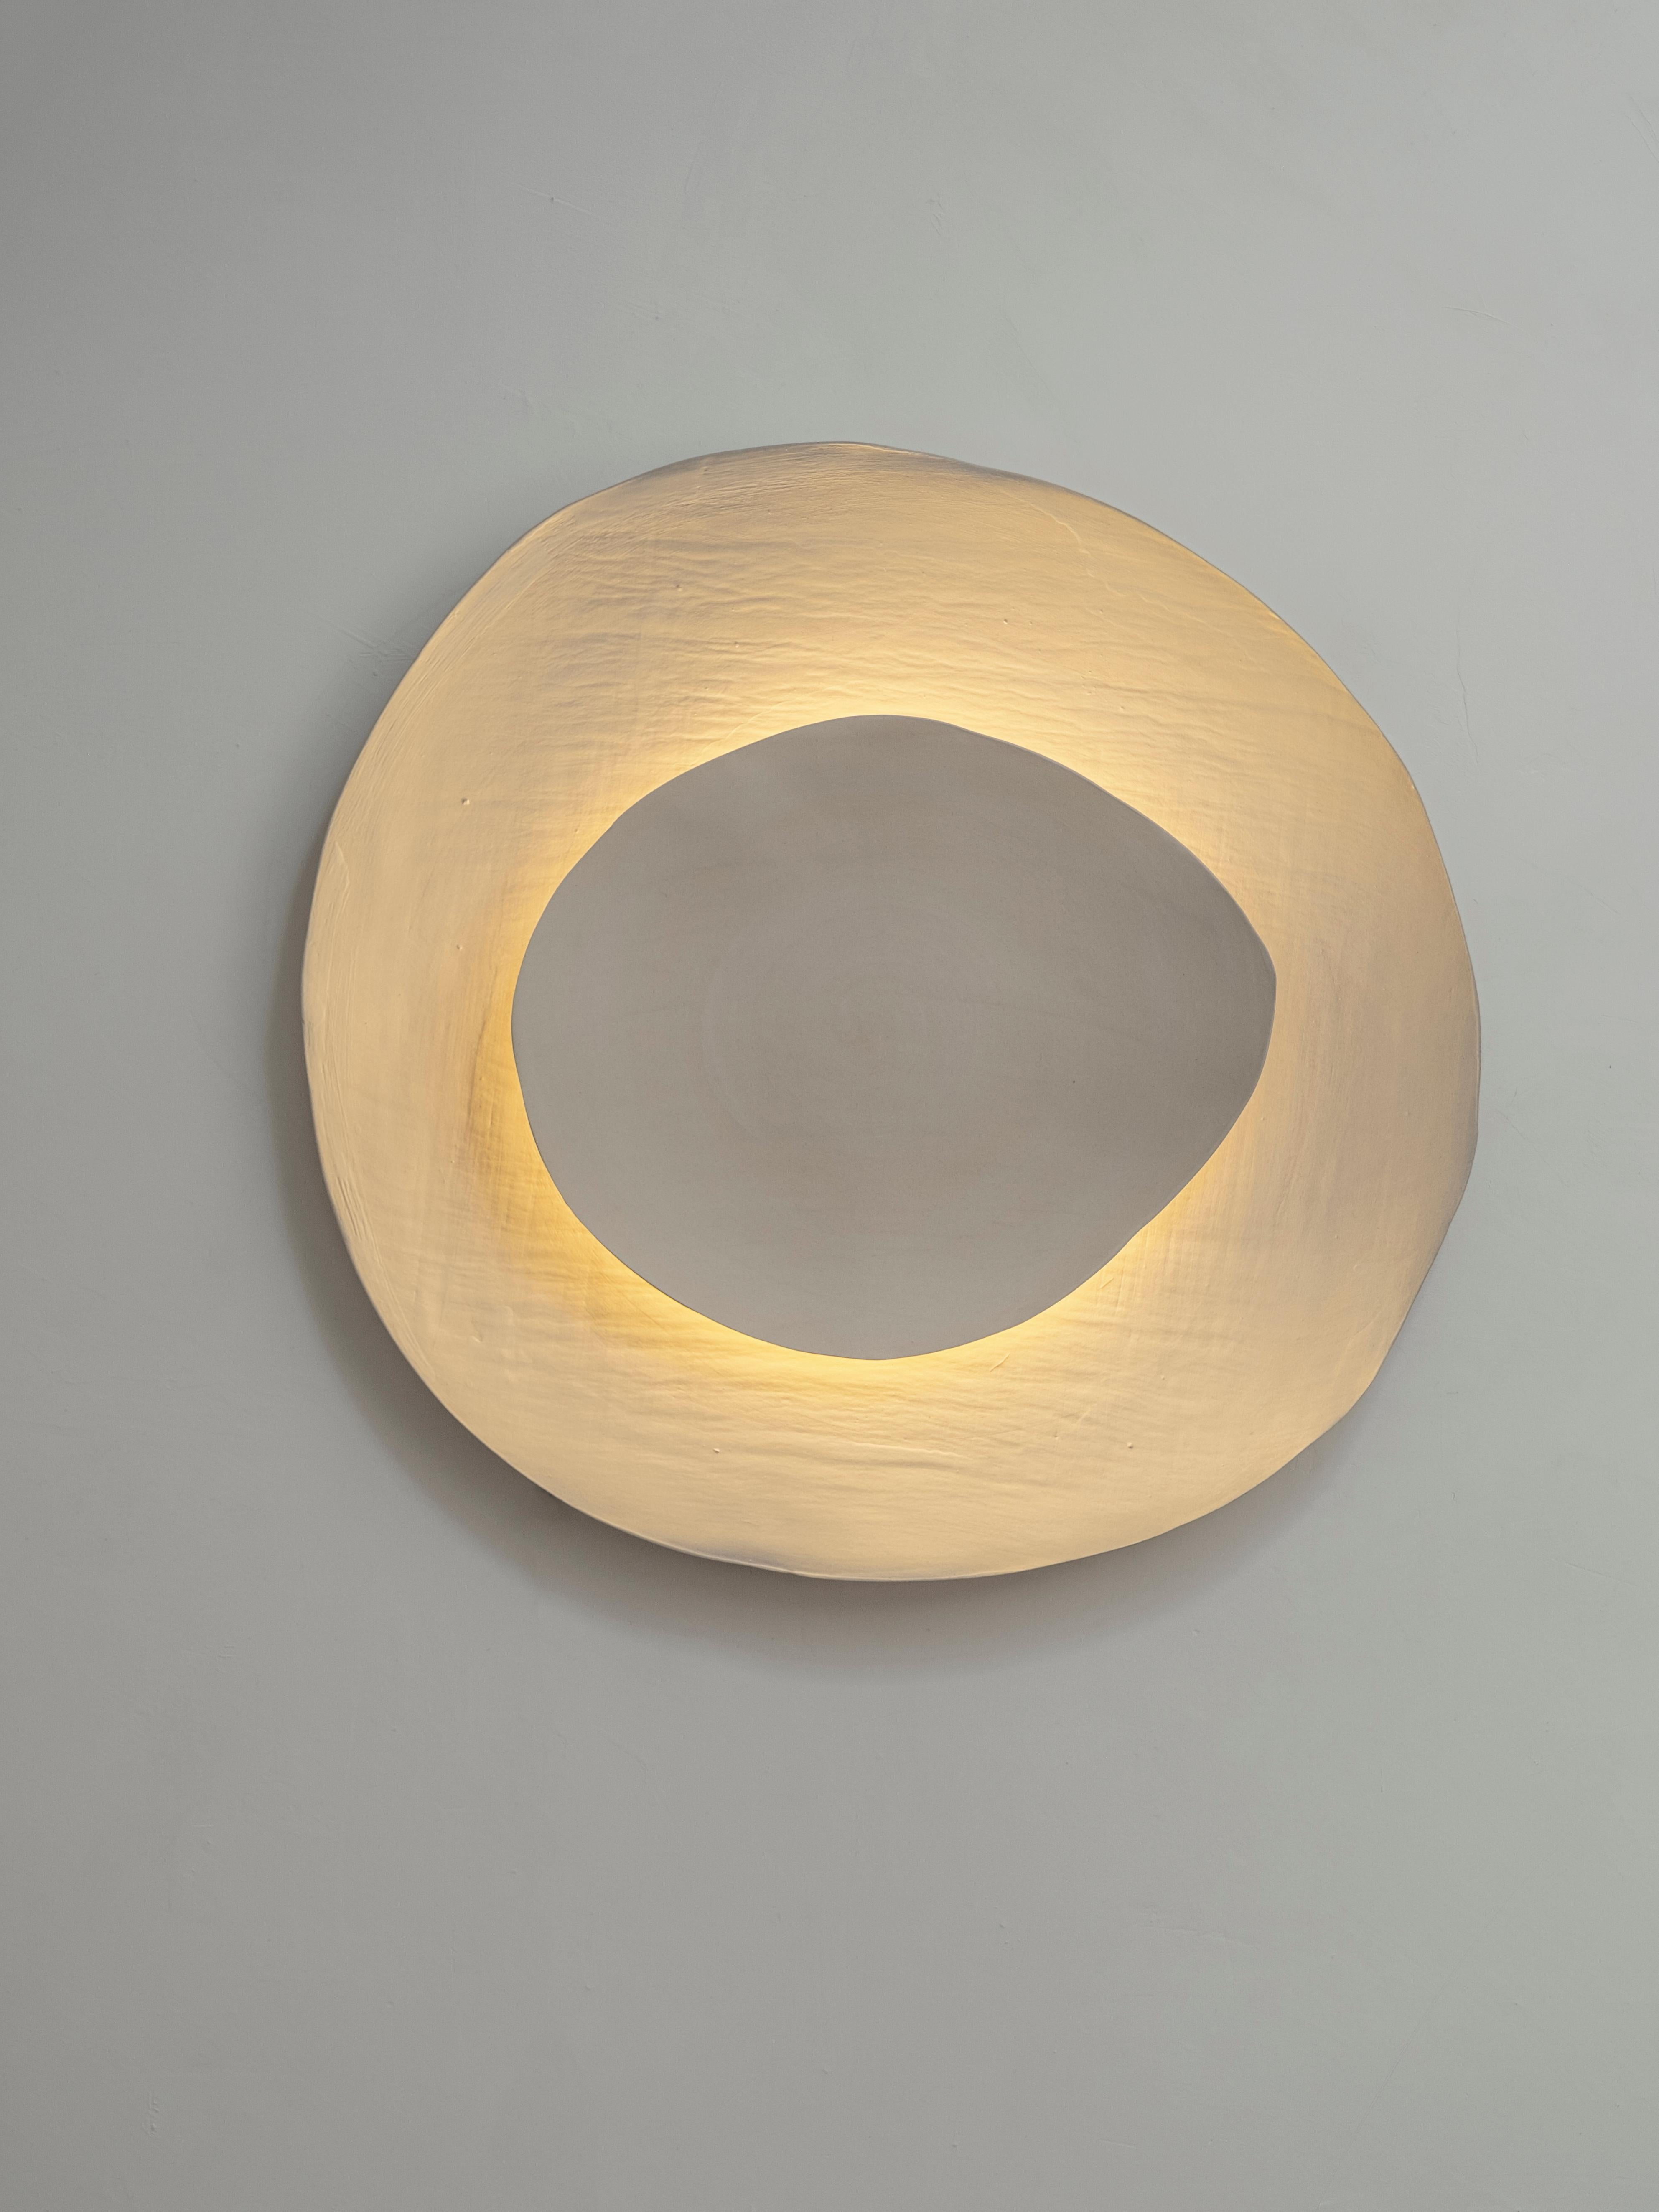 Silk #13 wall light by Margaux Leycuras
One of a Kind, Signed and numbered
Dimensions: Ø52, H55 cm.
Material: Ceramic, sandy stoneware platters with a porcelain slip finish.
The piece is signed, numbered and delivered with a certificate of